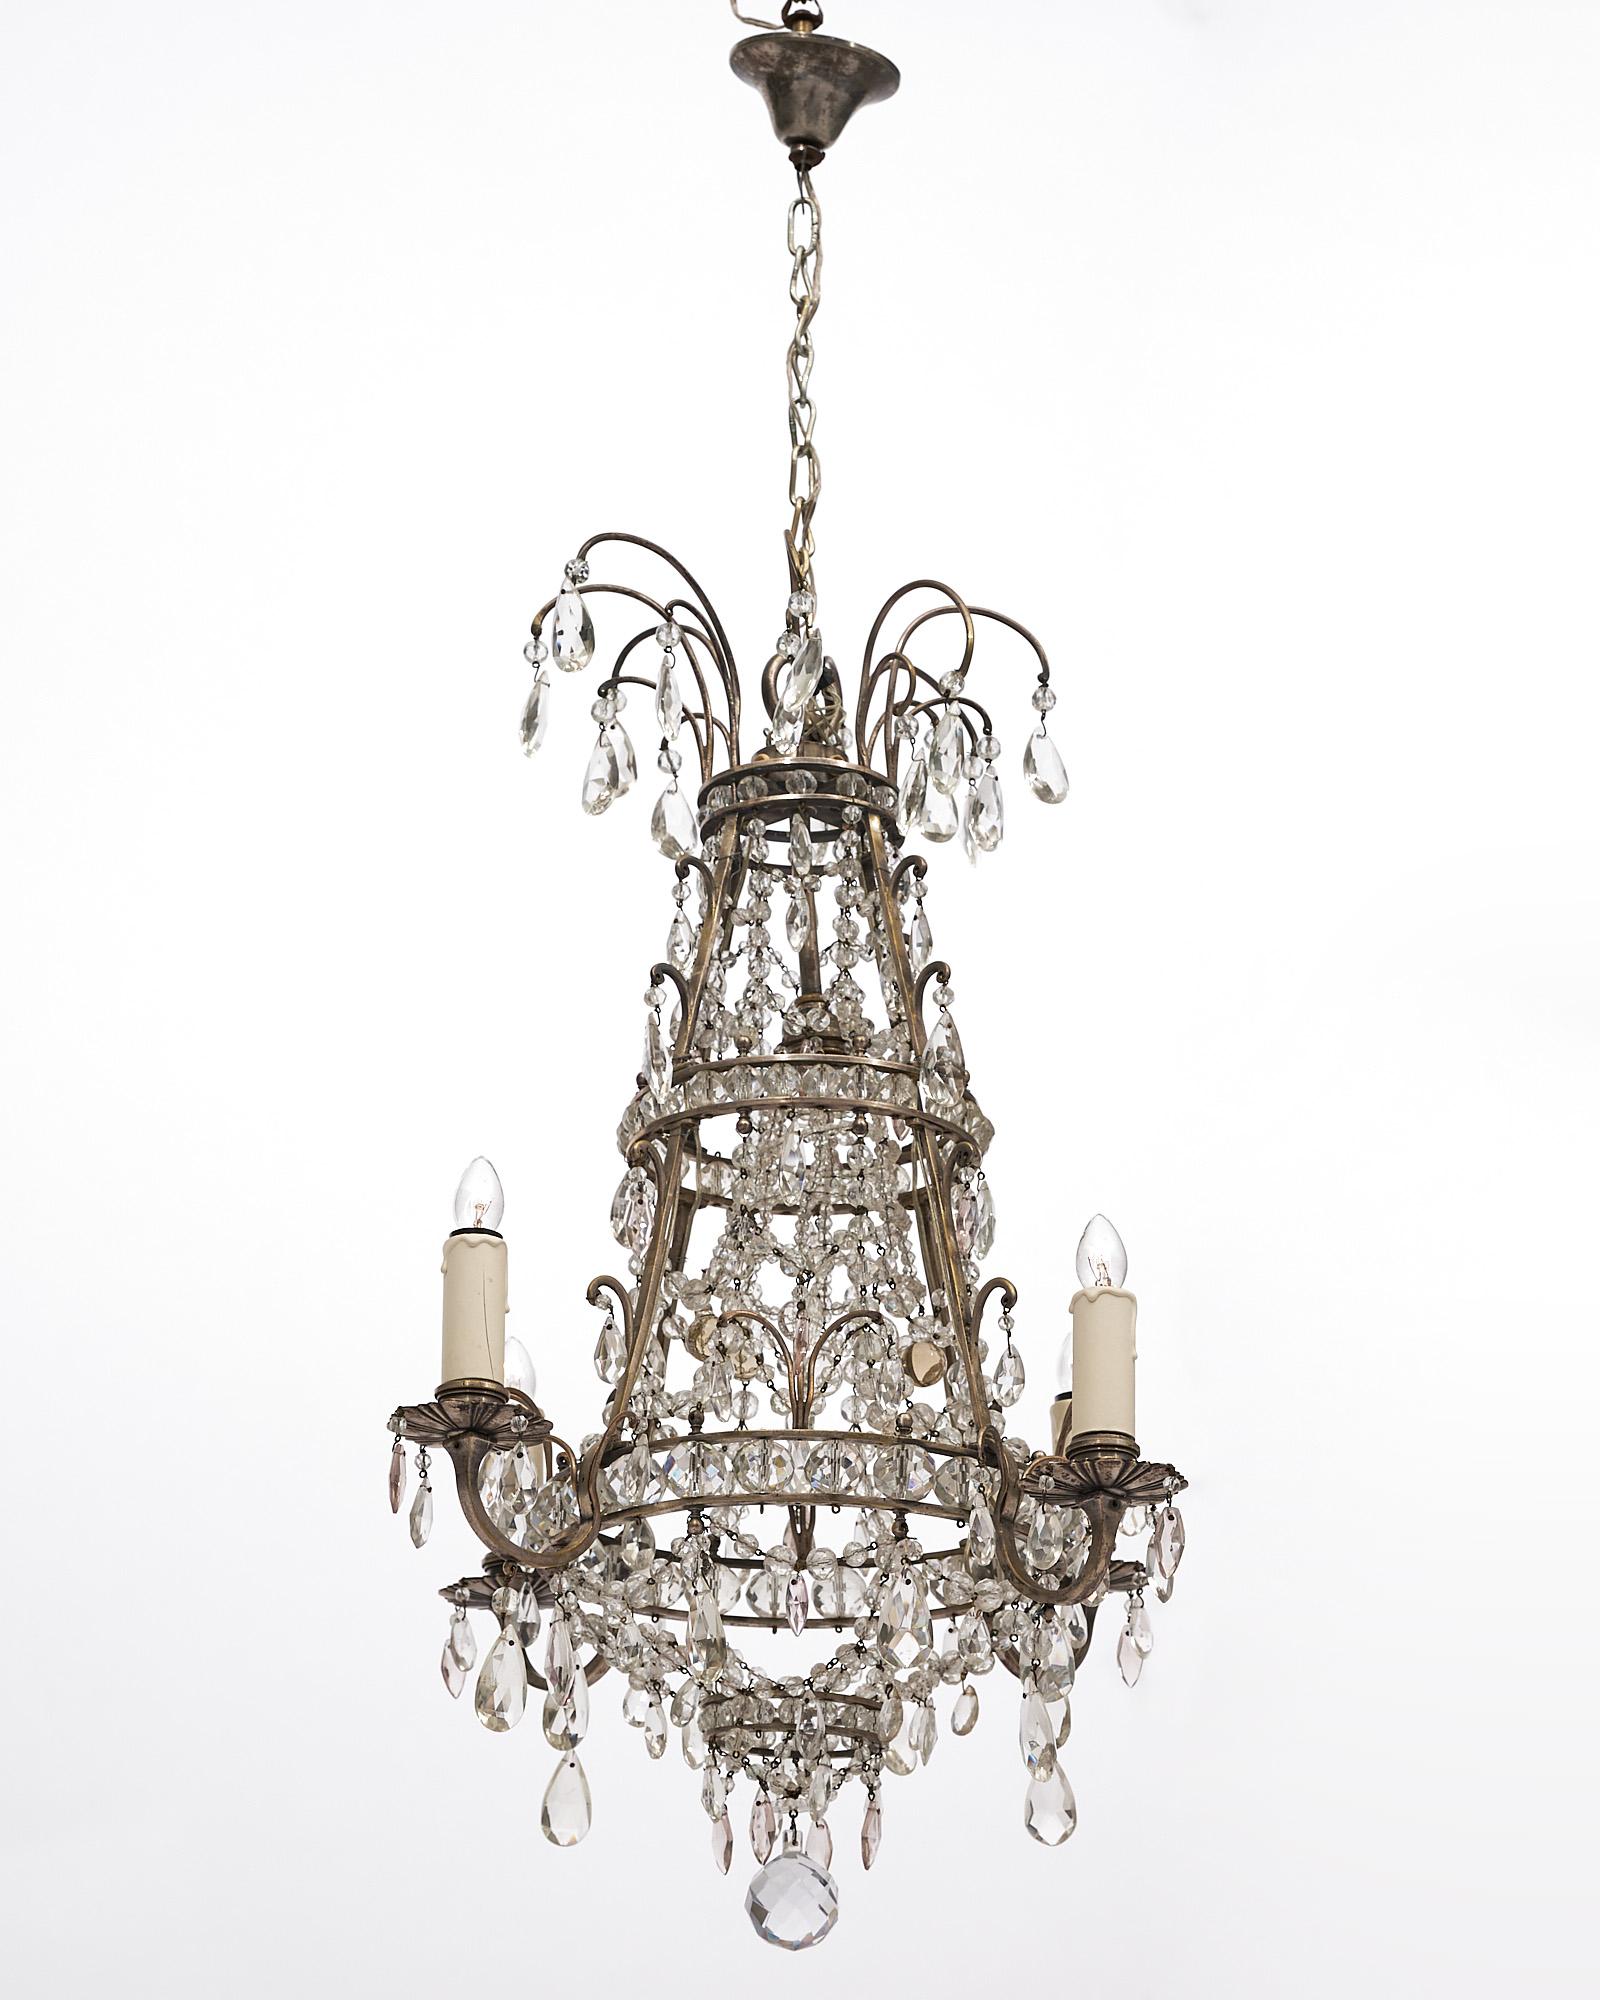 Early 20th Century French, Antique Crystal Chandelier For Sale